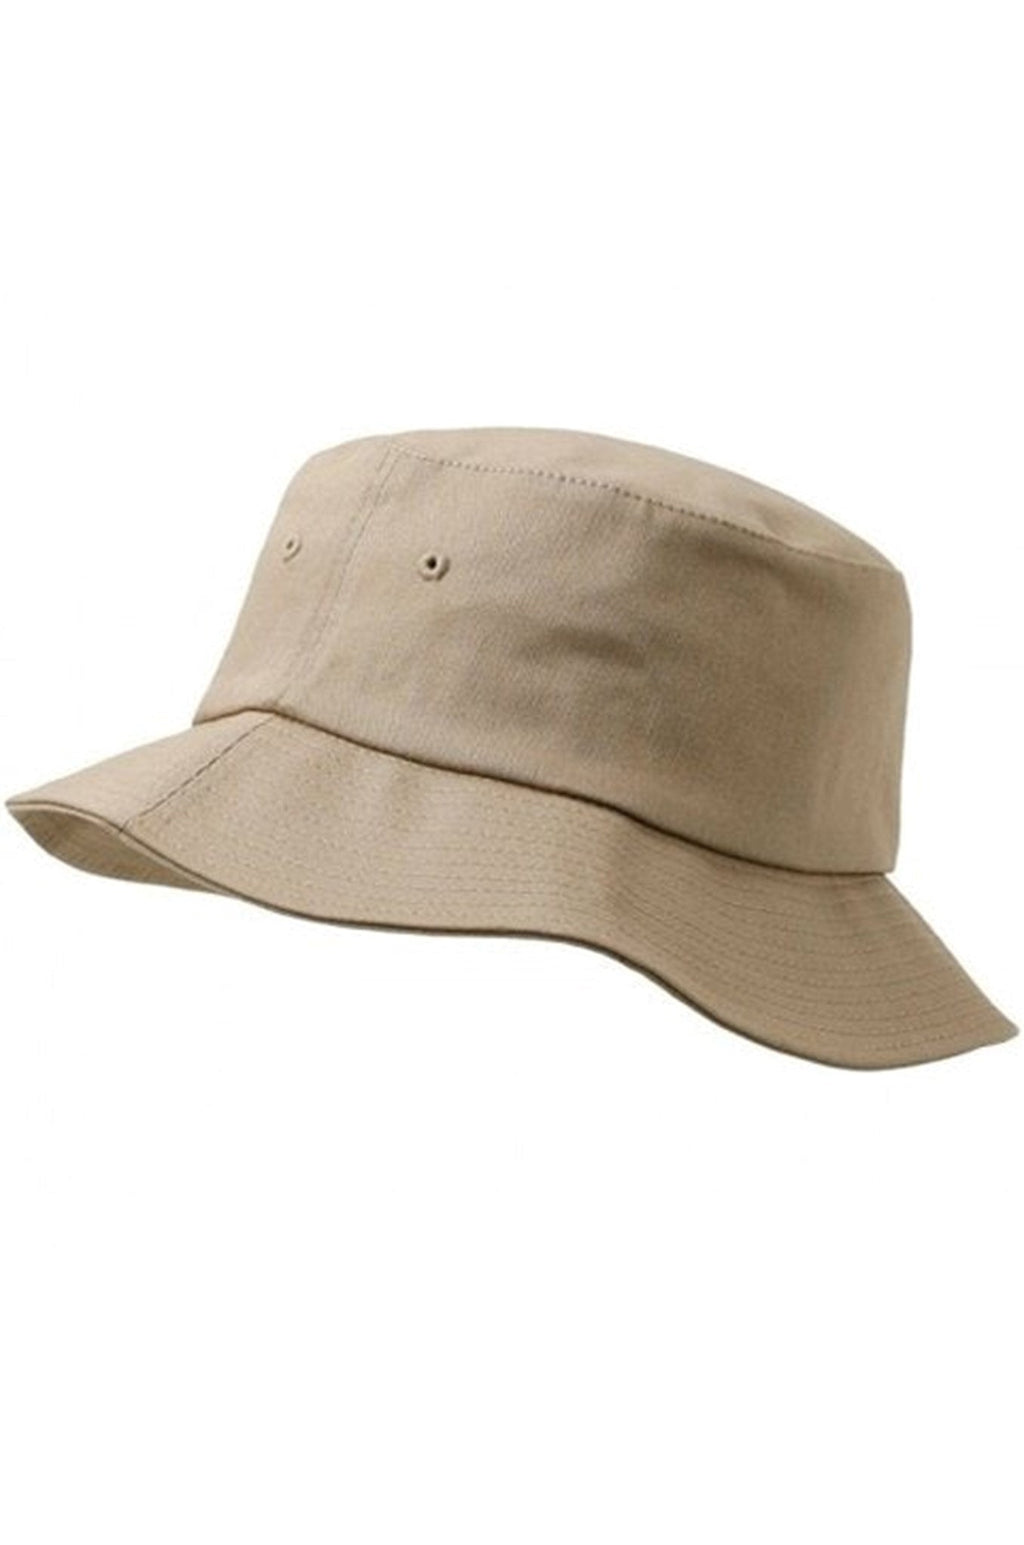 Bucket hat - Sand colored